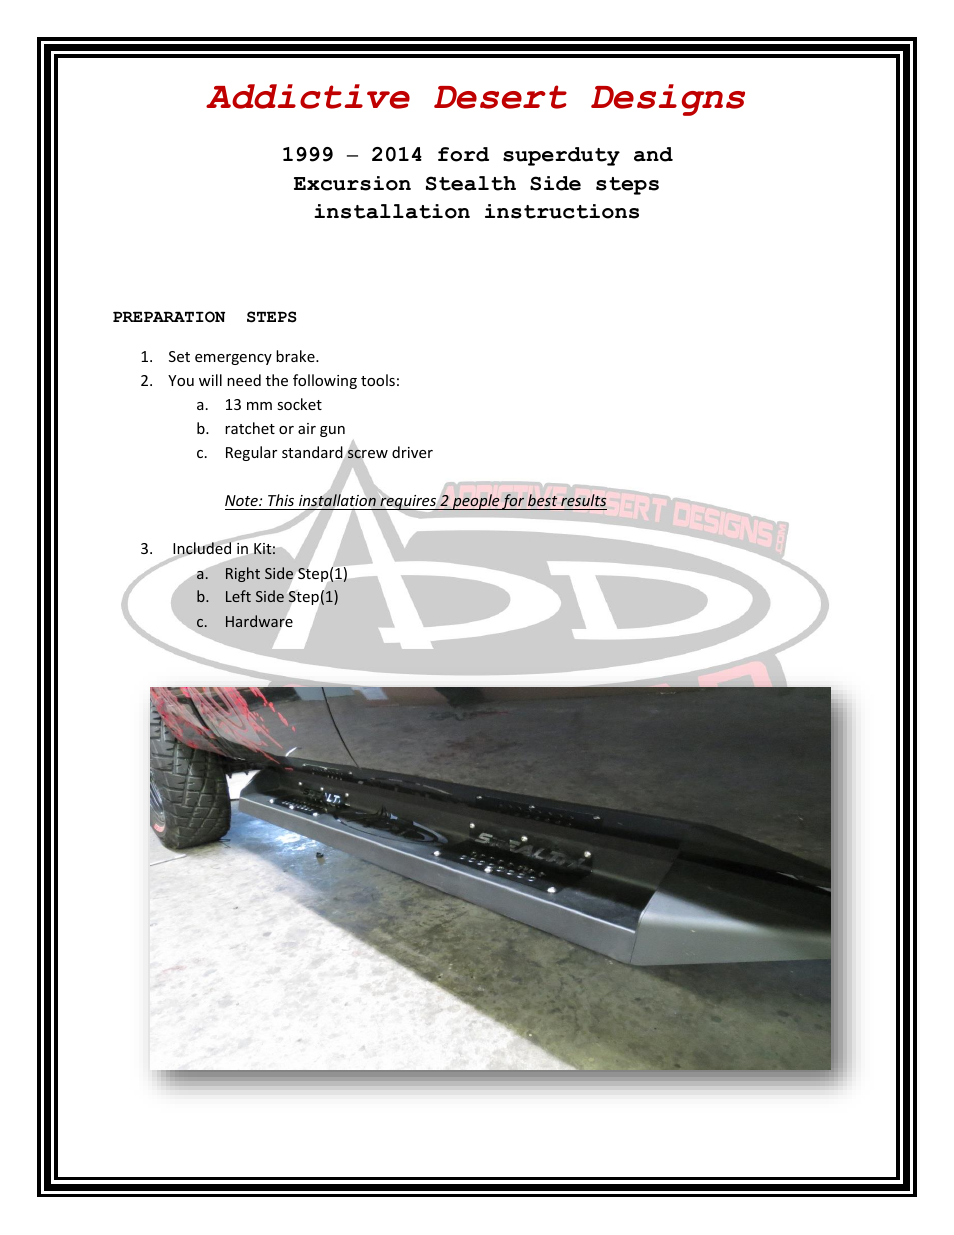 1999 - 2014 Ford SuperDuty and Excursion Stealth Side Step